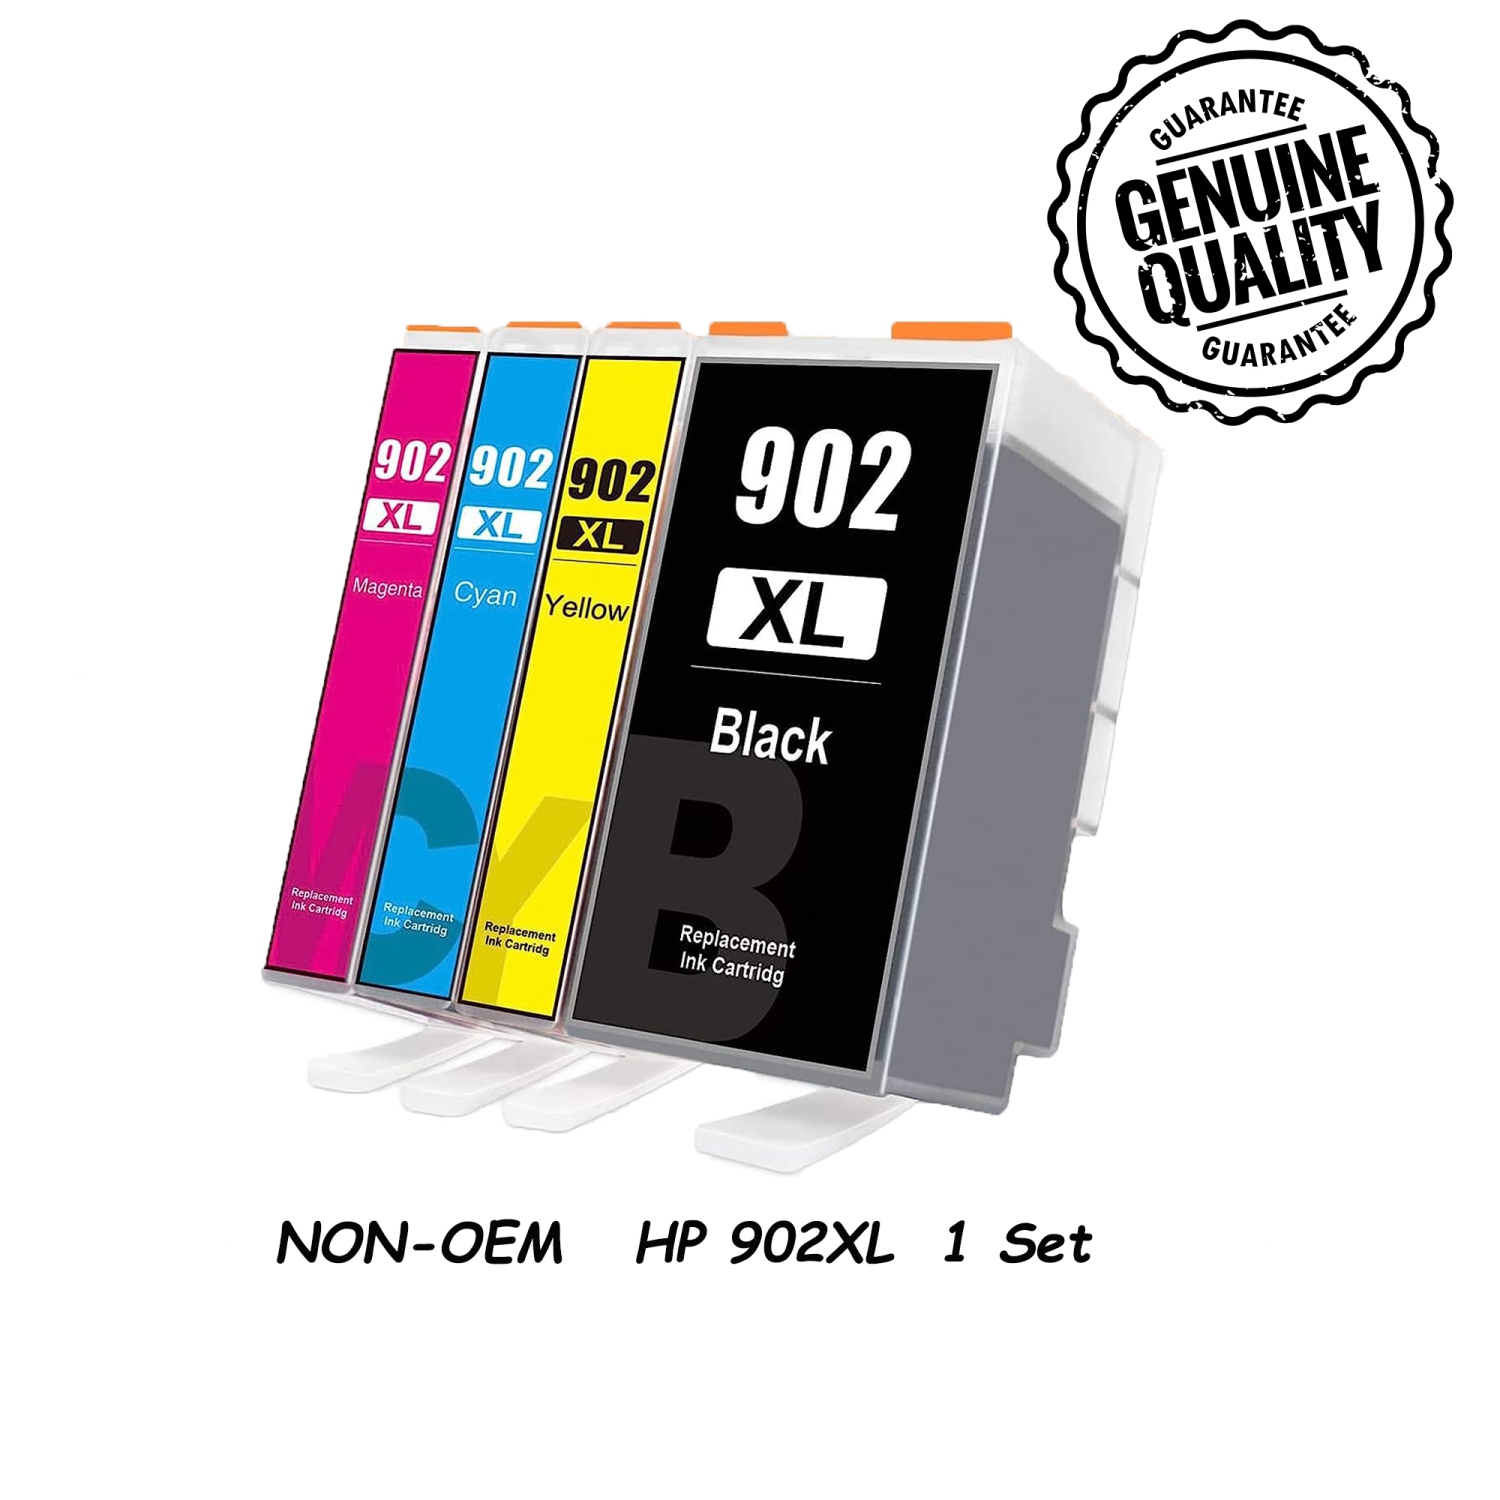 [New Chip] 1 Set Compatible HP 902 XL Ink Cartridges 902XL High Yield - HP OfficeJet 6950,6951,6954,6956,6962,6958,6900,6960,6965,6968,6970,6975,6978,6979,6961,6966, 6971